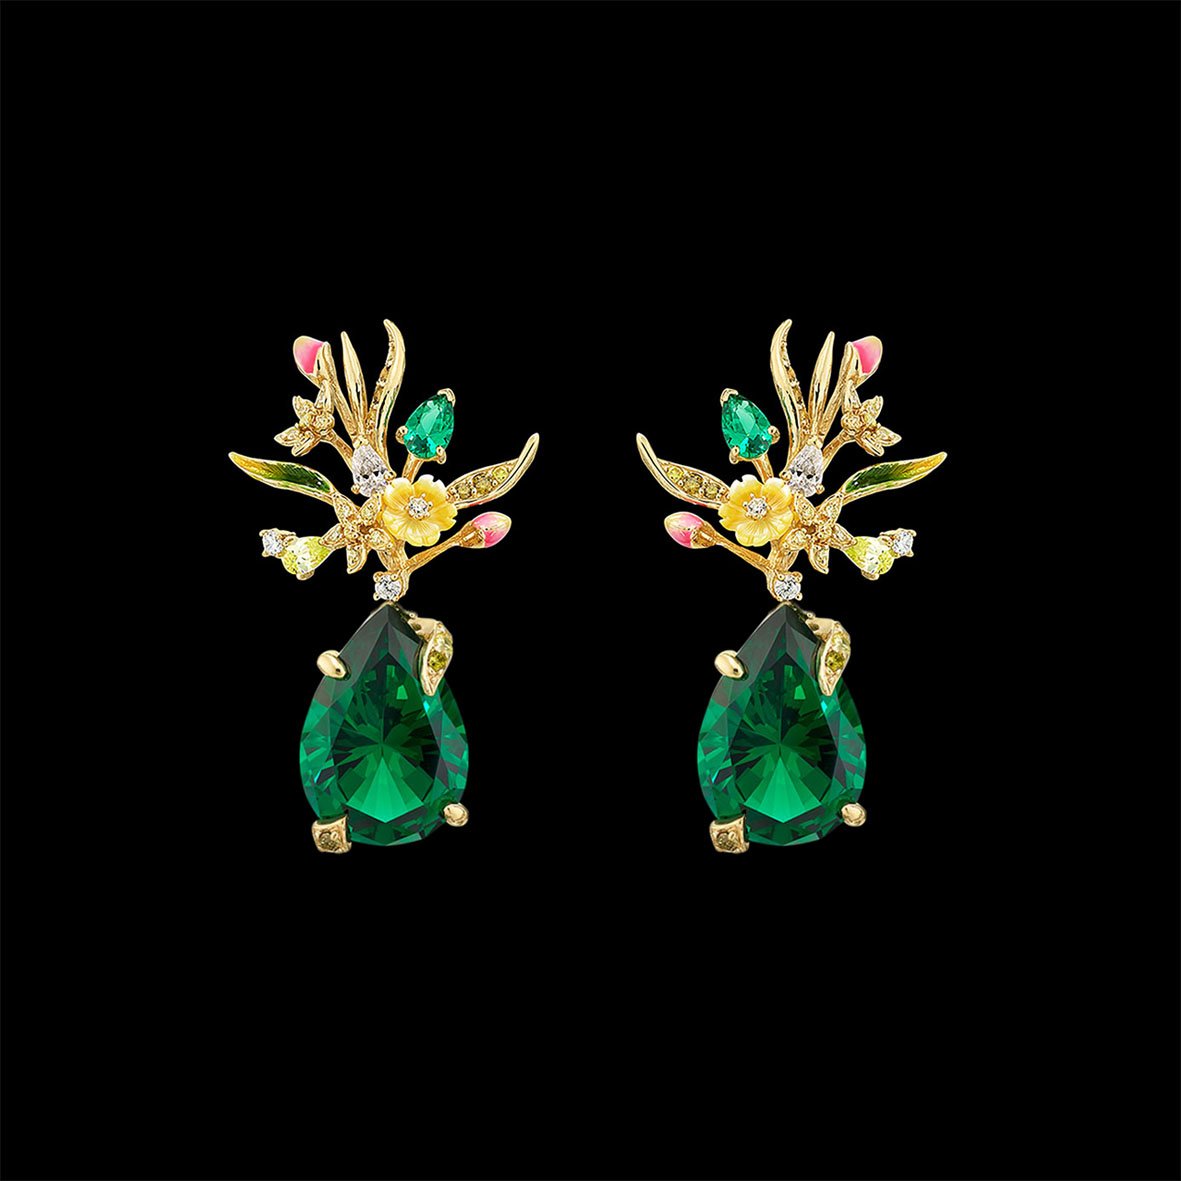 Mini Posie Emerald Earrings, Earring, Anabela Chan Joaillerie - Fine jewelry with laboratory grown and created gemstones hand-crafted in the United Kingdom. Anabela Chan Joaillerie is the first fine jewellery brand in the world to champion laboratory-grown and created gemstones with high jewellery design, artisanal craftsmanship and a focus on ethical and sustainable innovations.